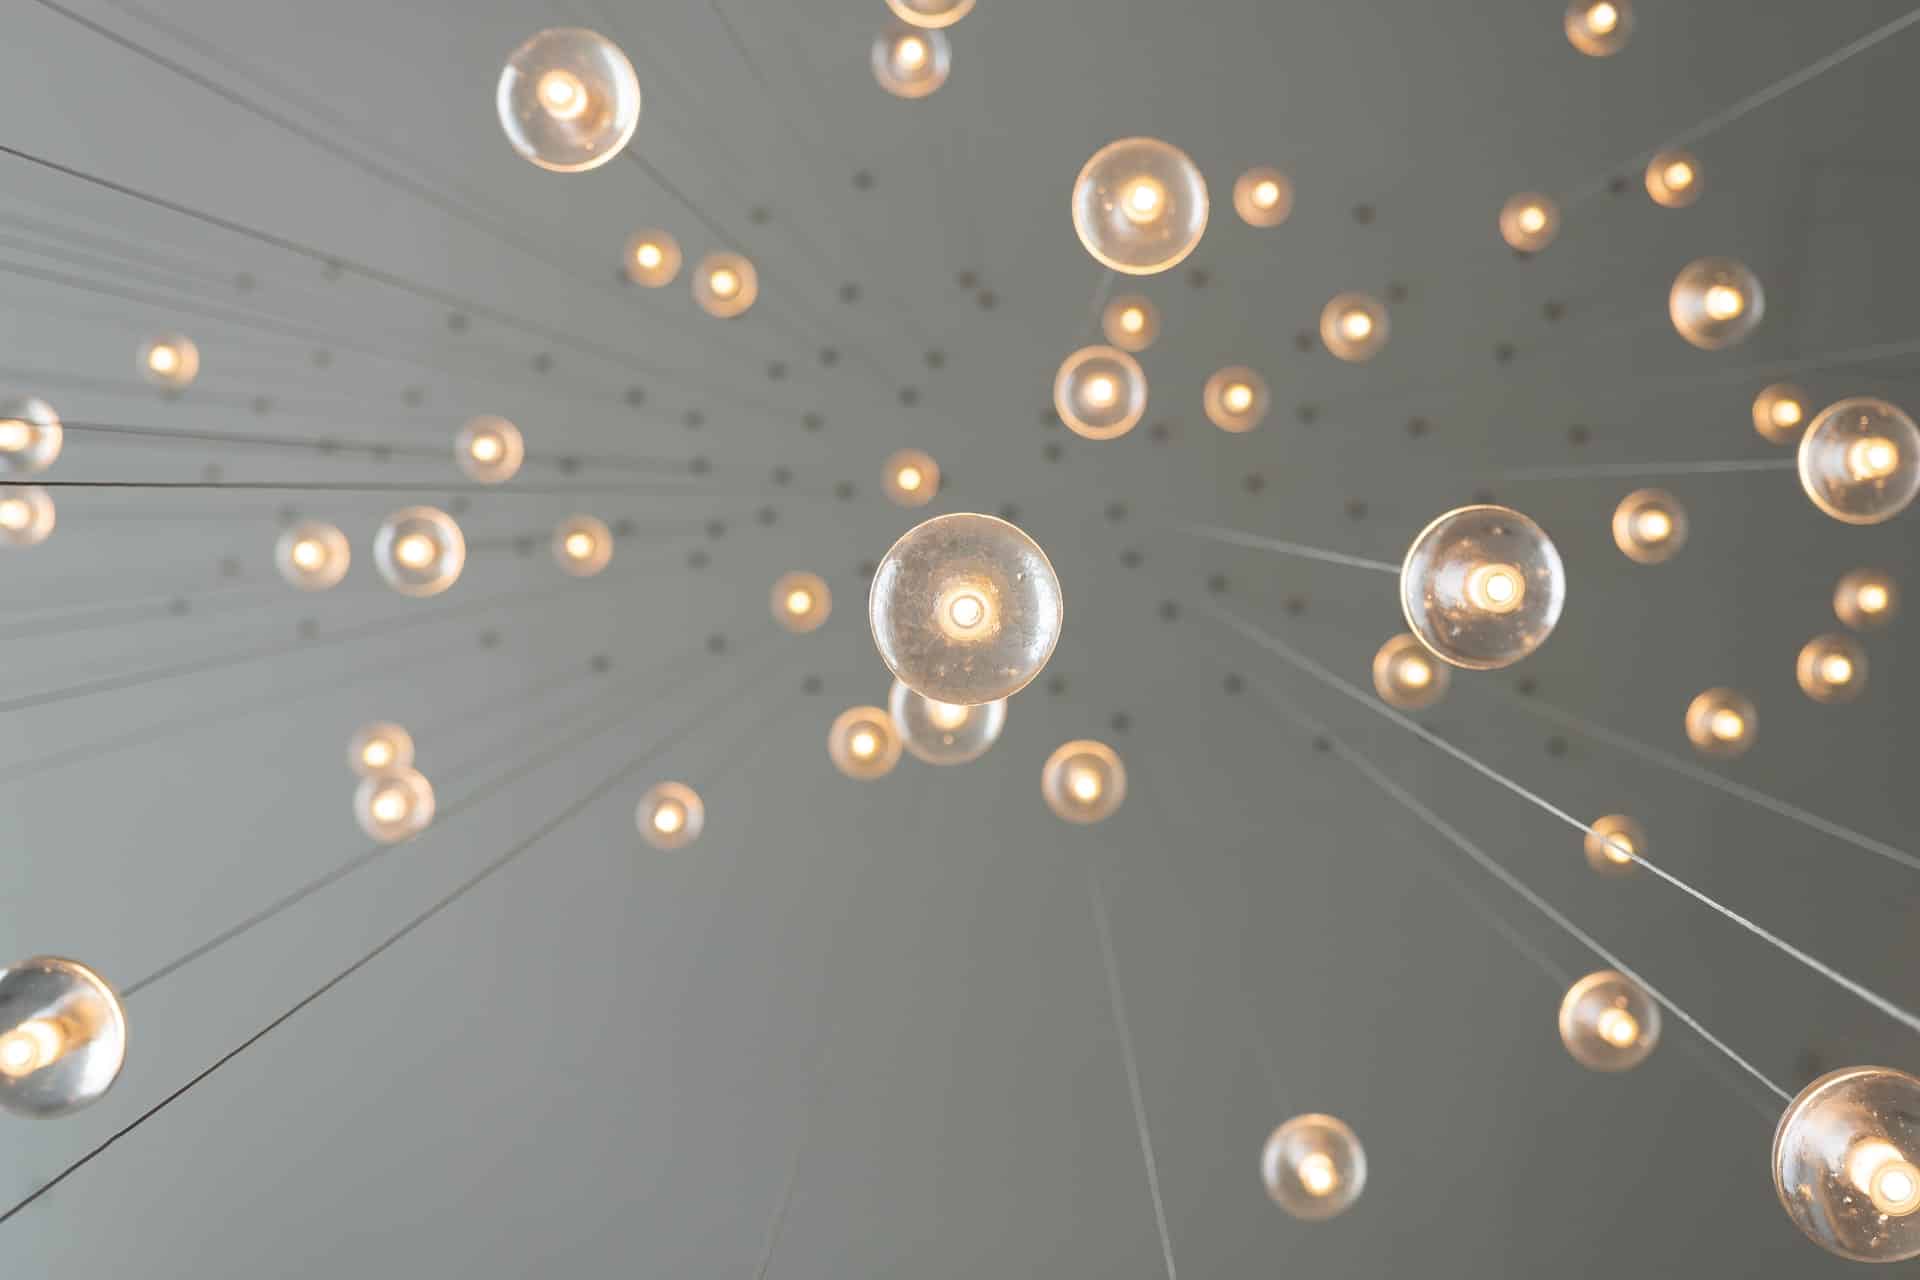 Image shows lightbulbs hanging from a ceiling, illustrating innovation and change.